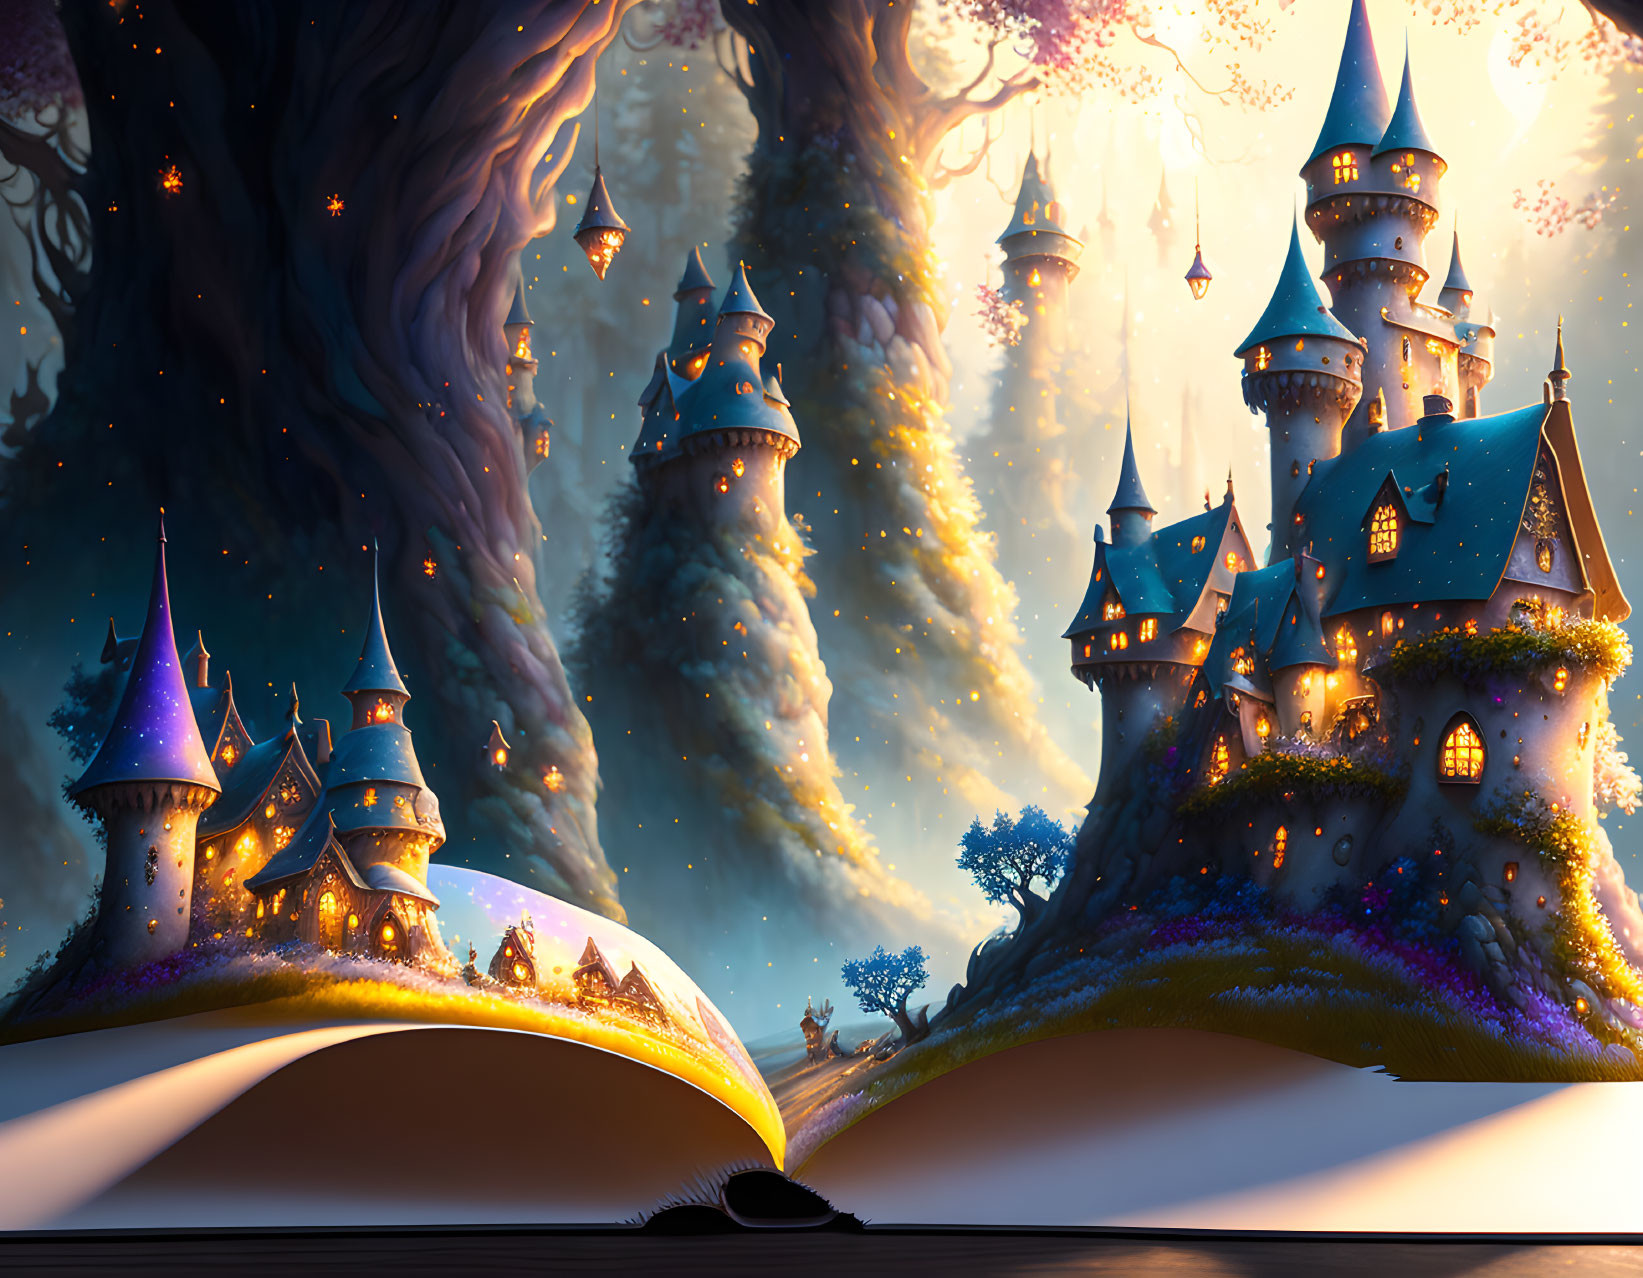 Open book pages transform into whimsical landscape with magical castles and sparkling lights